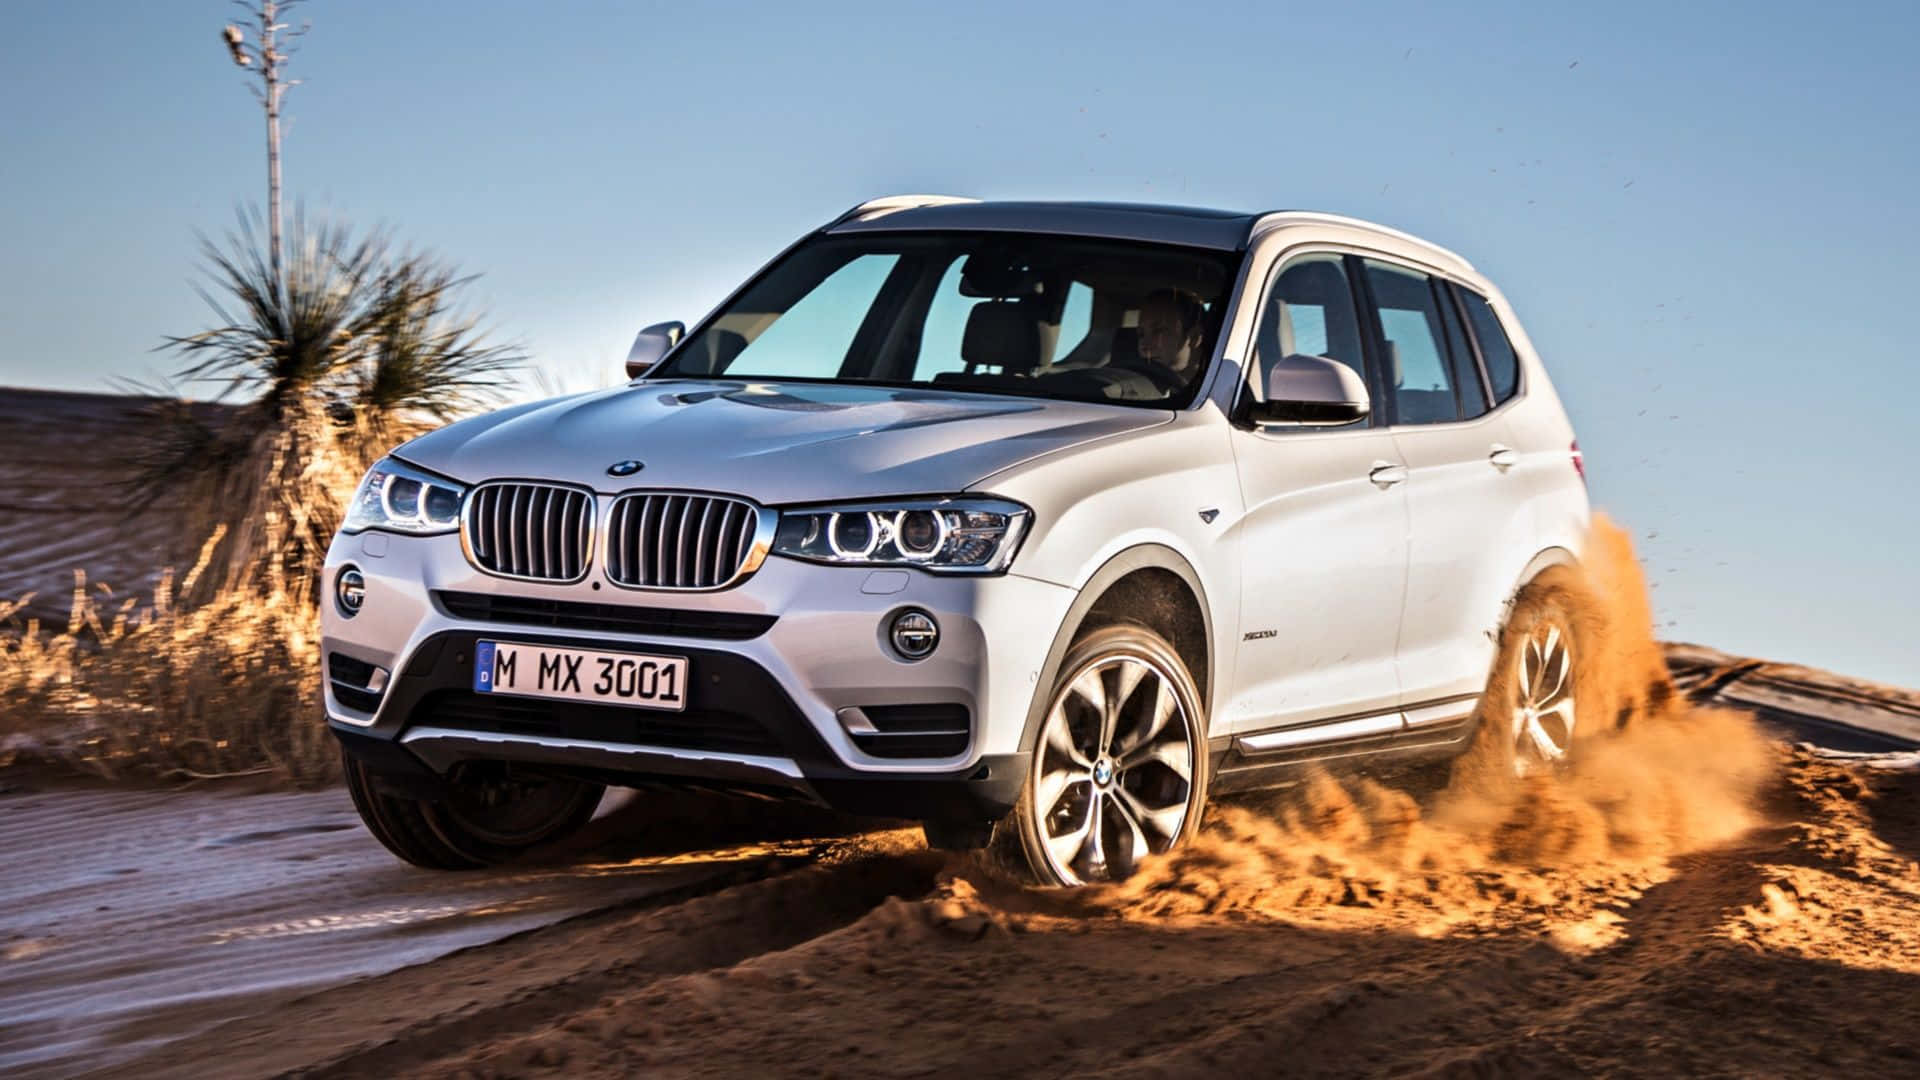 Sleek and Stylish BMW X3 SUV in Action Wallpaper